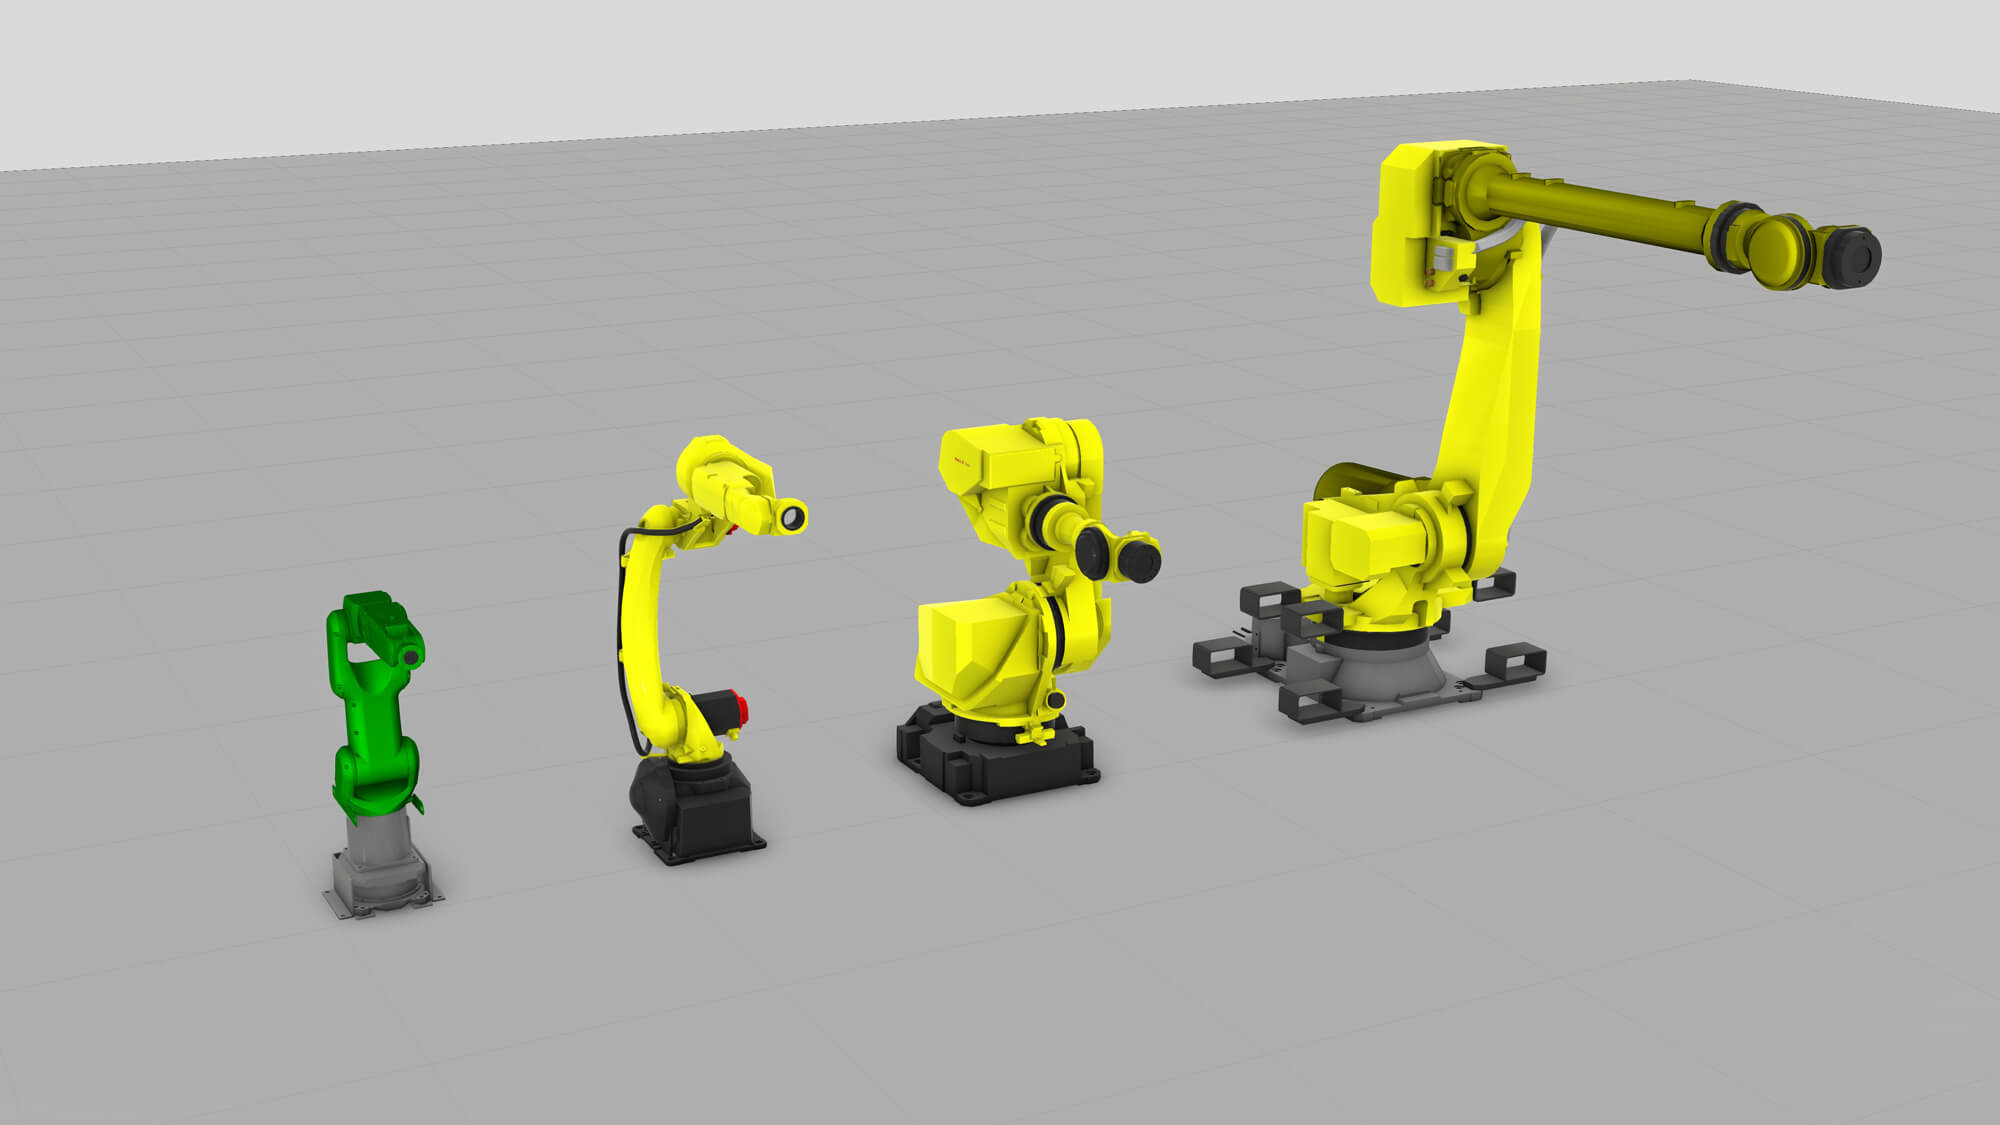 The new Fanuc component additions to Visual Components eCatalog in April 2018